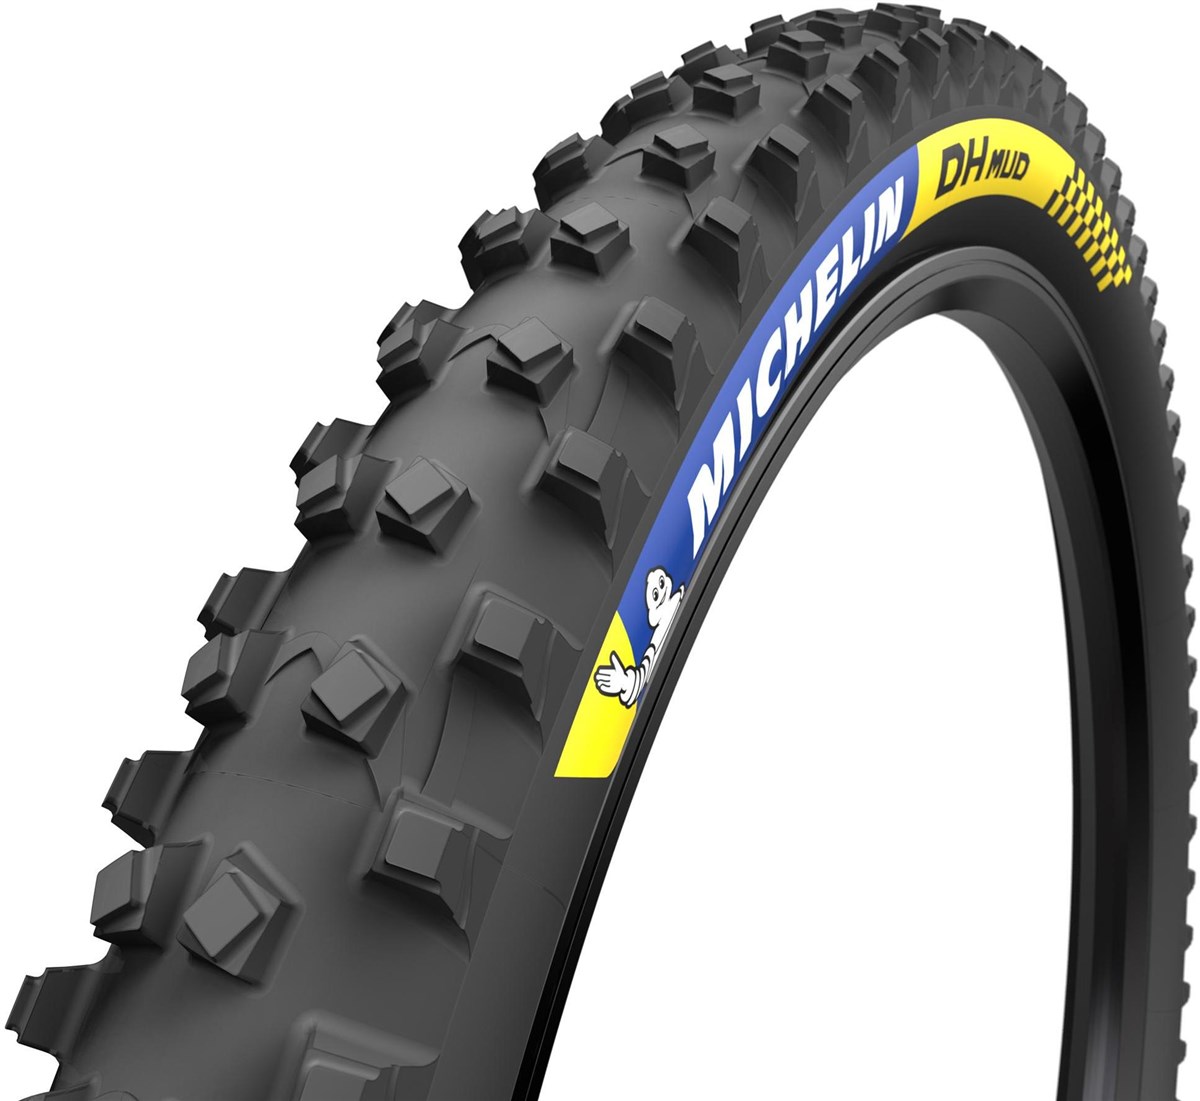 Michelin DH Mud 29" MTB Tyre product image